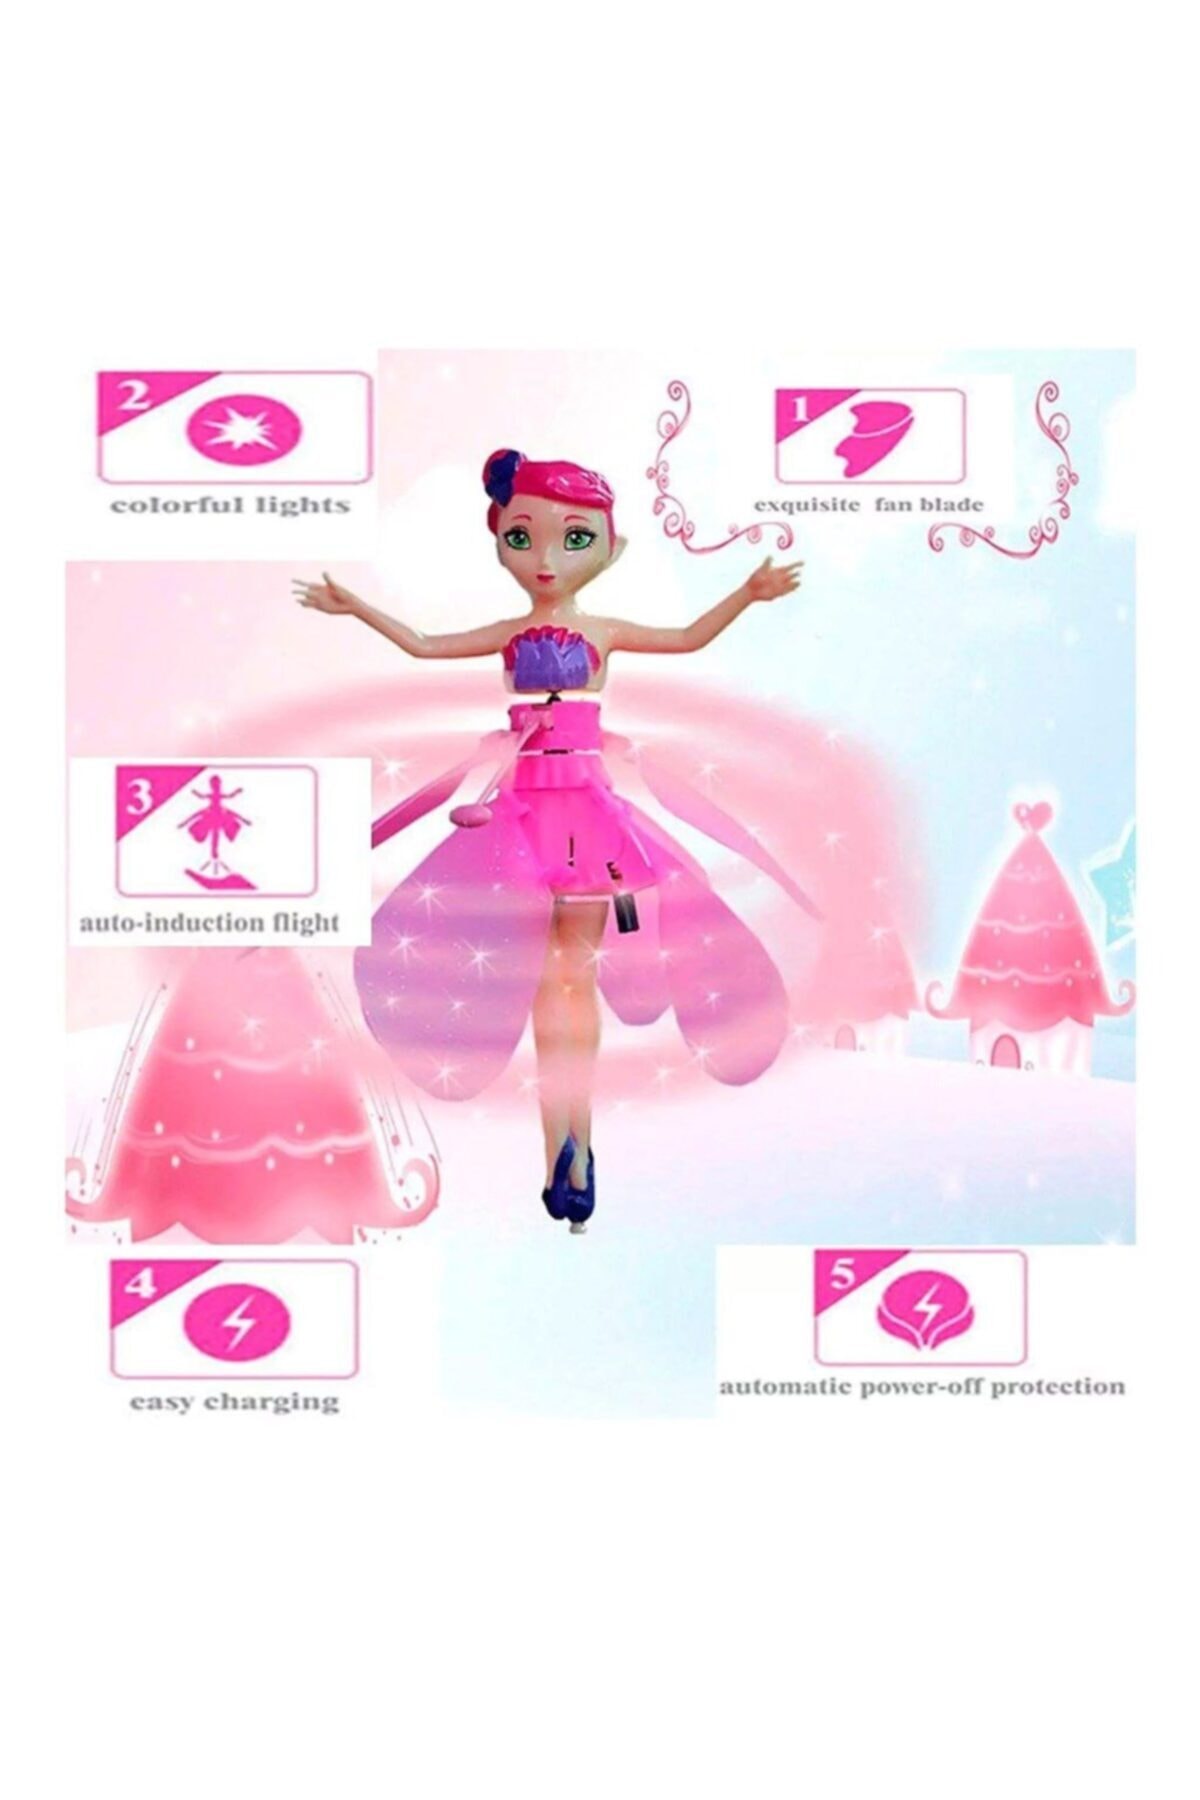 Flying-Fairy-Toy-Magic-Flying-Fairy-Pink-With-Charged-Motion-Sensor-For-Children-Kids-Girls-Fun-3.jpg